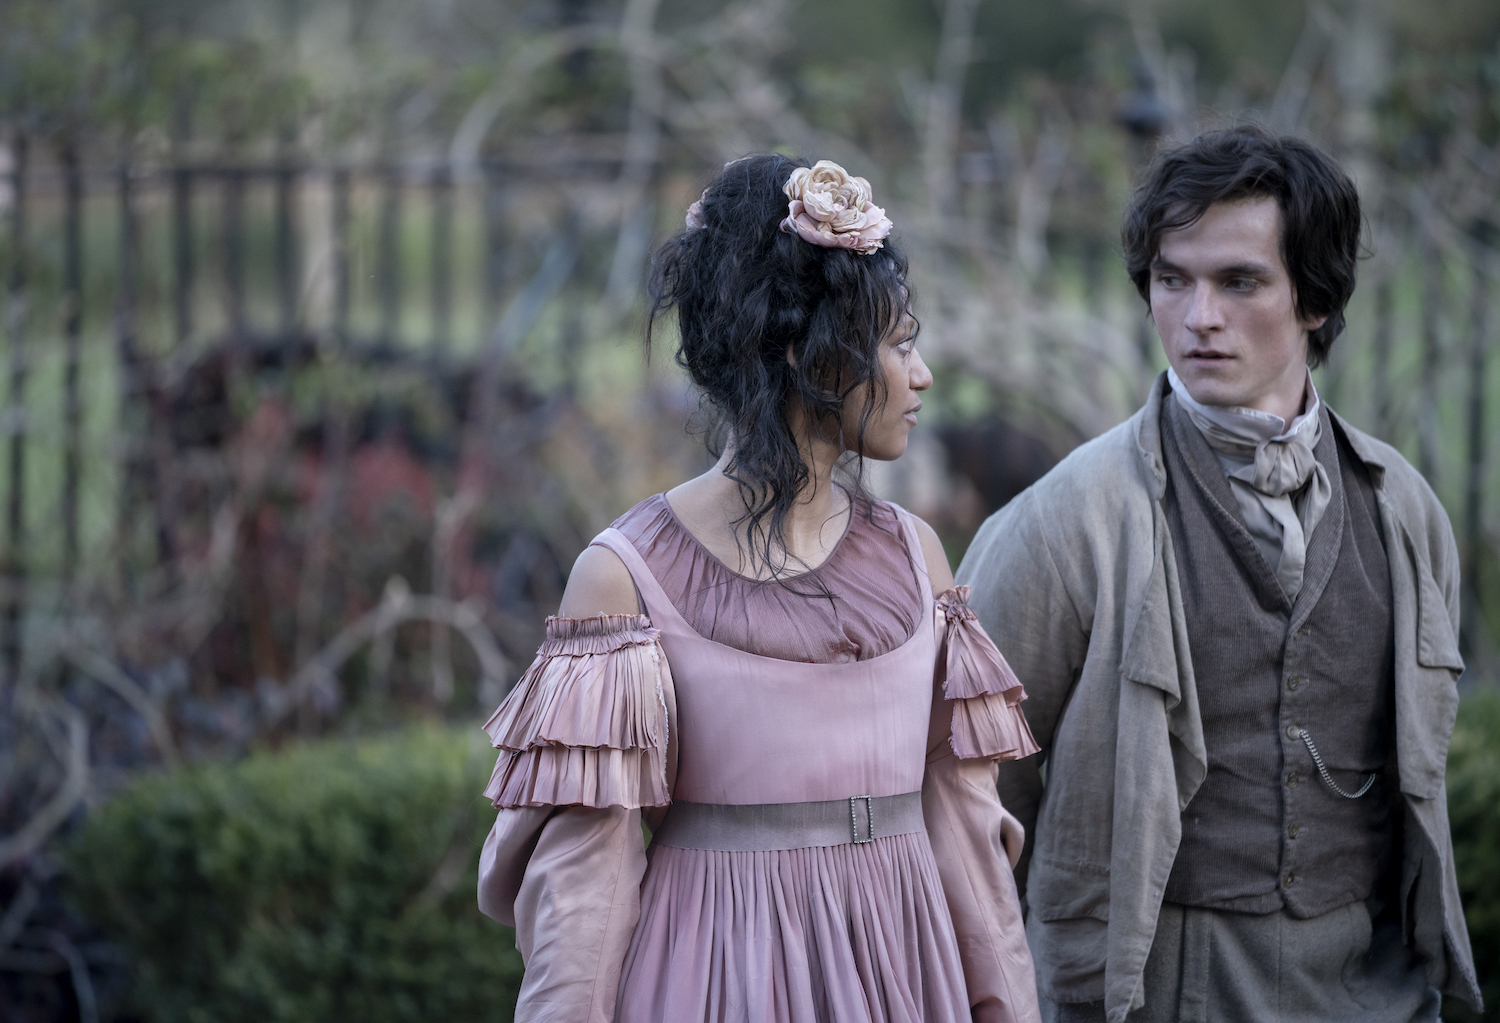 Picture shows: Pip (Fionn Whitehead) and Estella (Shalom Brune-Franklin) walk together in the garden